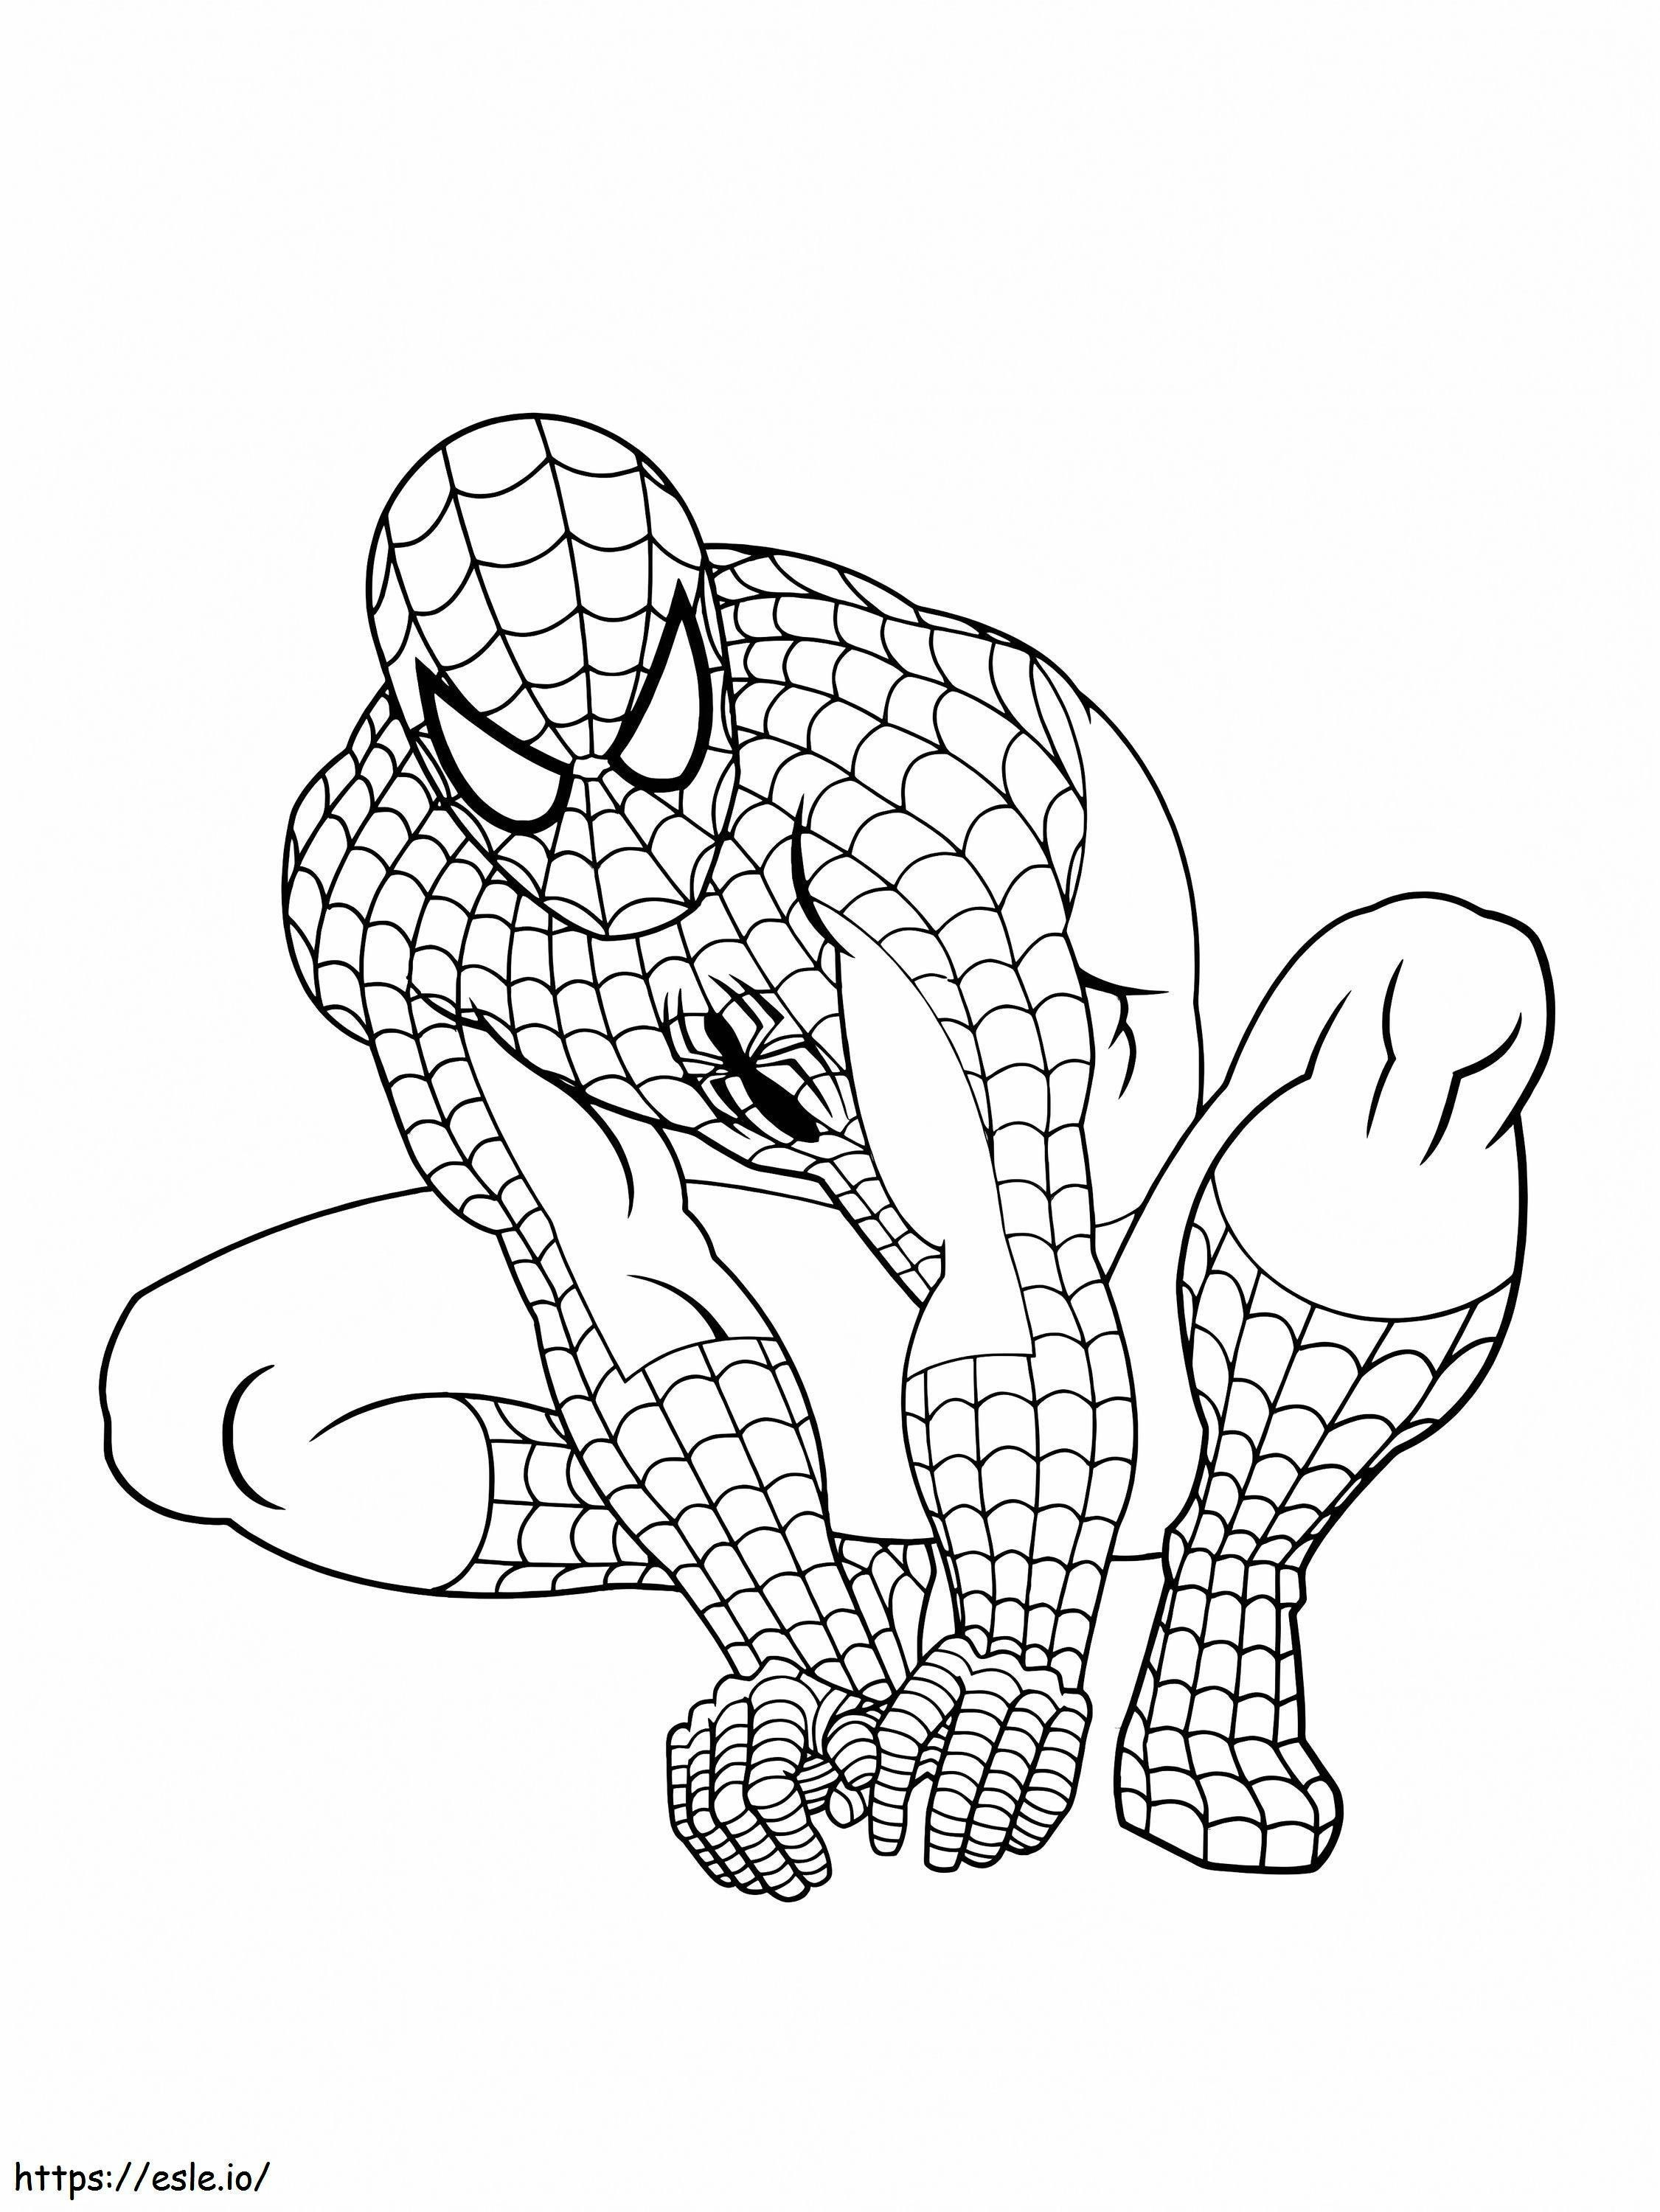 Spiderman 11 coloring page